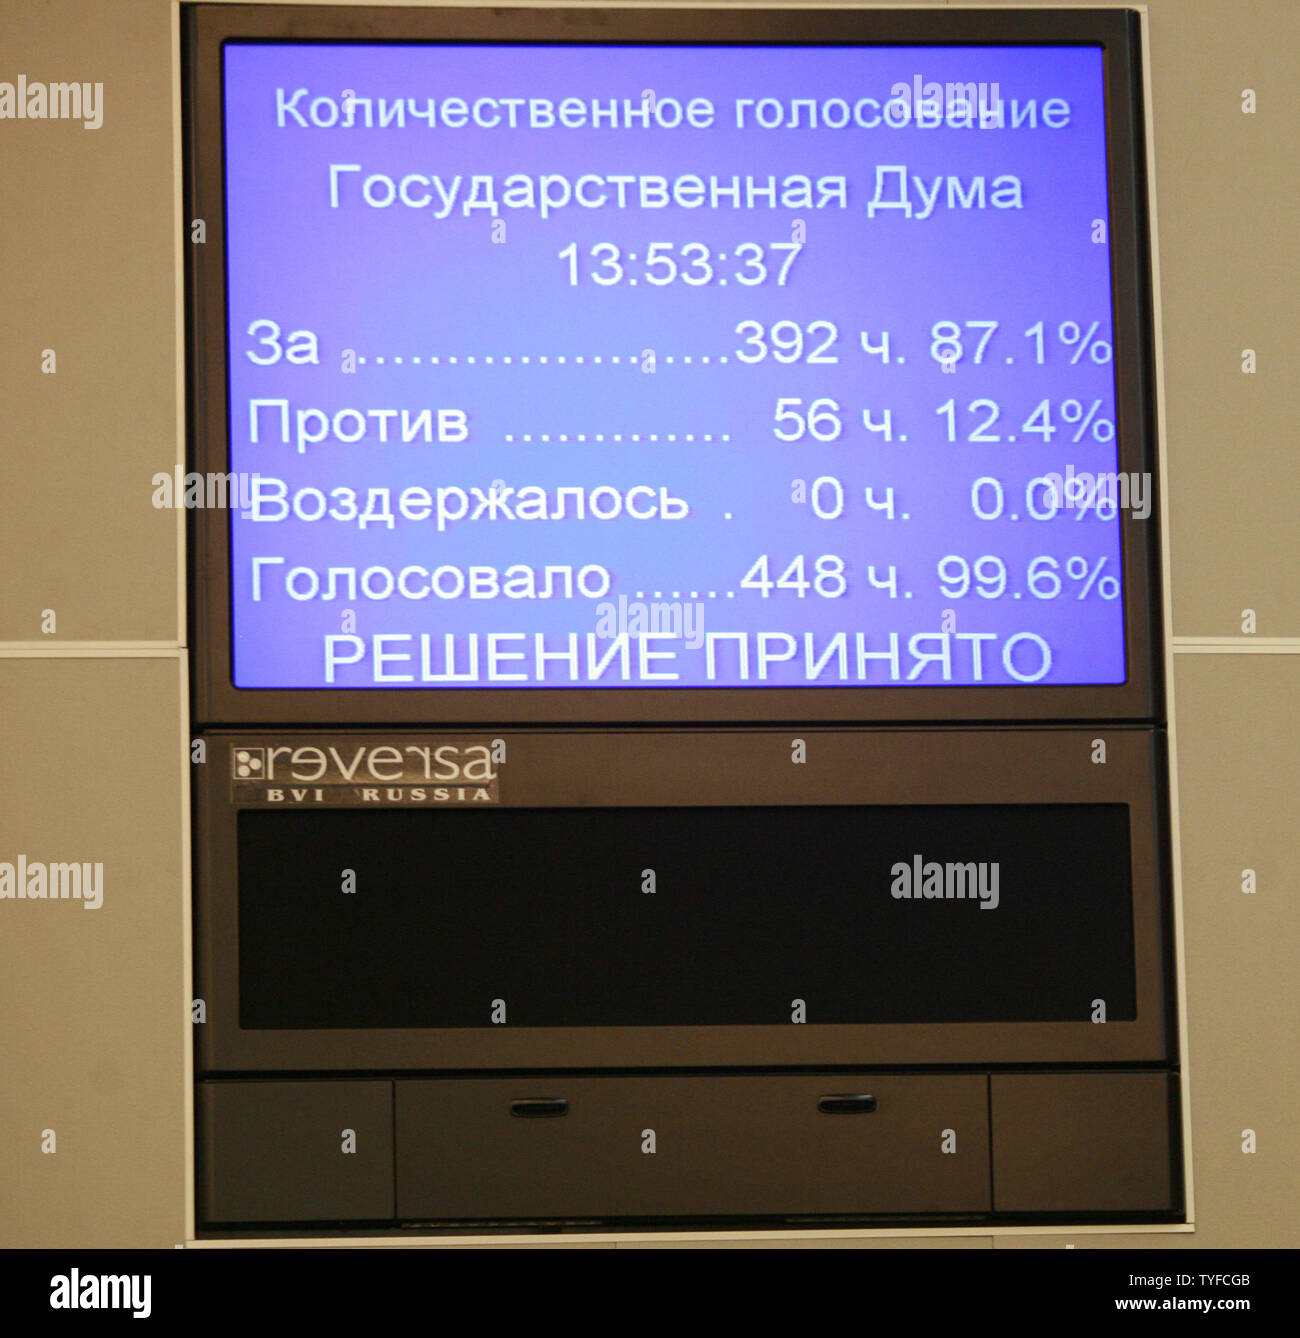 The results of the voting on Former Russian President Vladimir Putin to be new prime minister is seen at the State Duma parliament in Moscow on May 8, 2008. The results are 87% for yes, 12,4% for no. (UPI Photo/Anatoli Zhdanov) Stock Photo